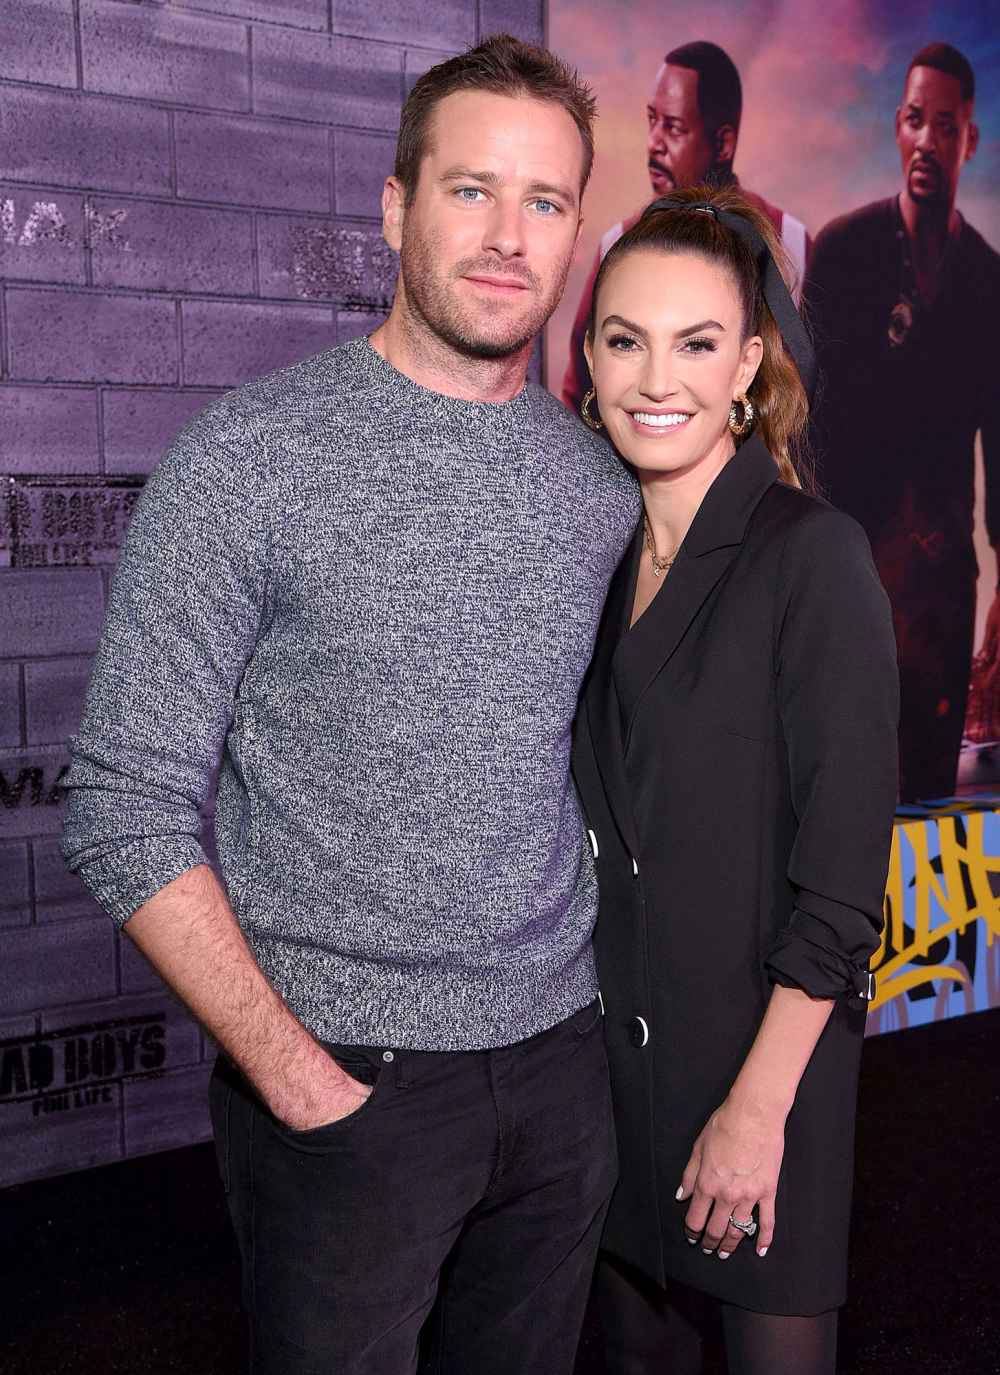 Armie Hammer Estranged Wife Elizabeth Chambers Horrified Over His Alleged DMs